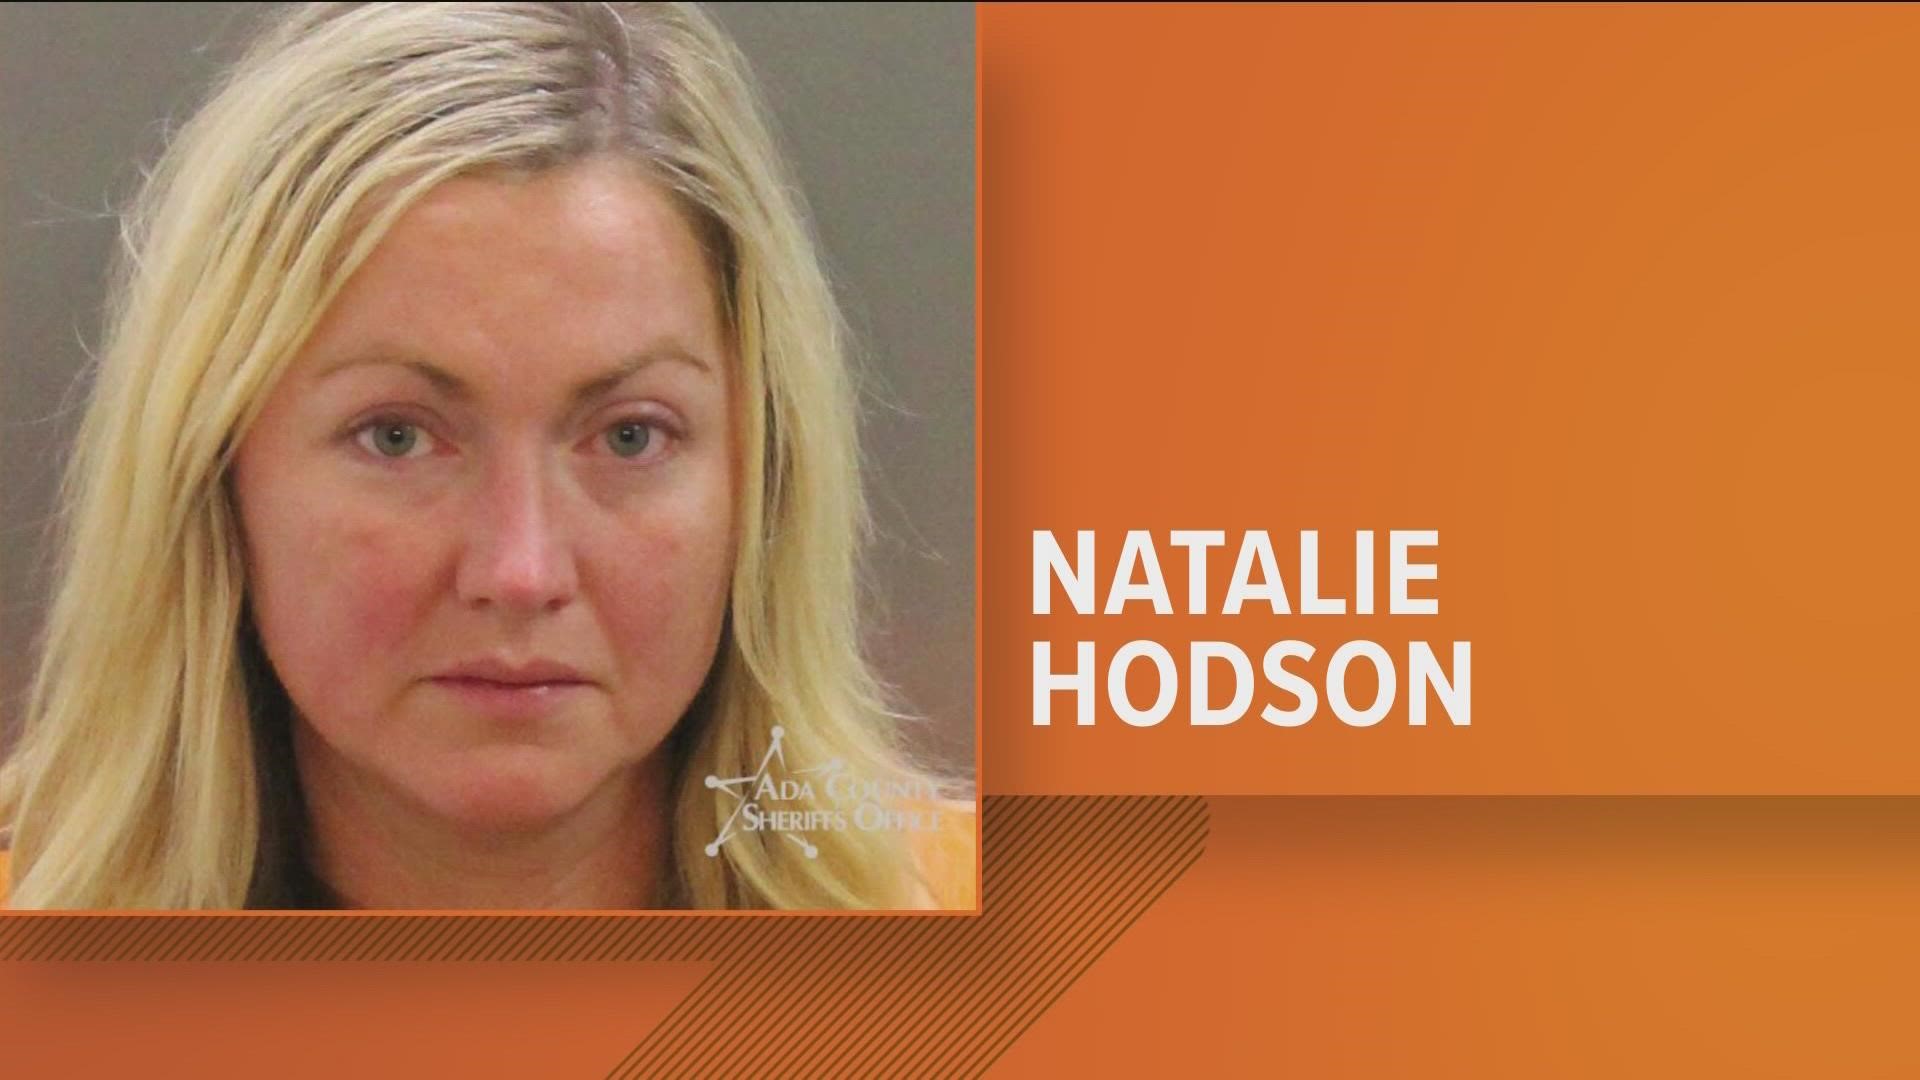 Natalie Hodson is charged with vehicular manslaughter and leaving the scene of an injury crash, after she hit 39-year-old Kristina Rowley of Cascade, Idaho.